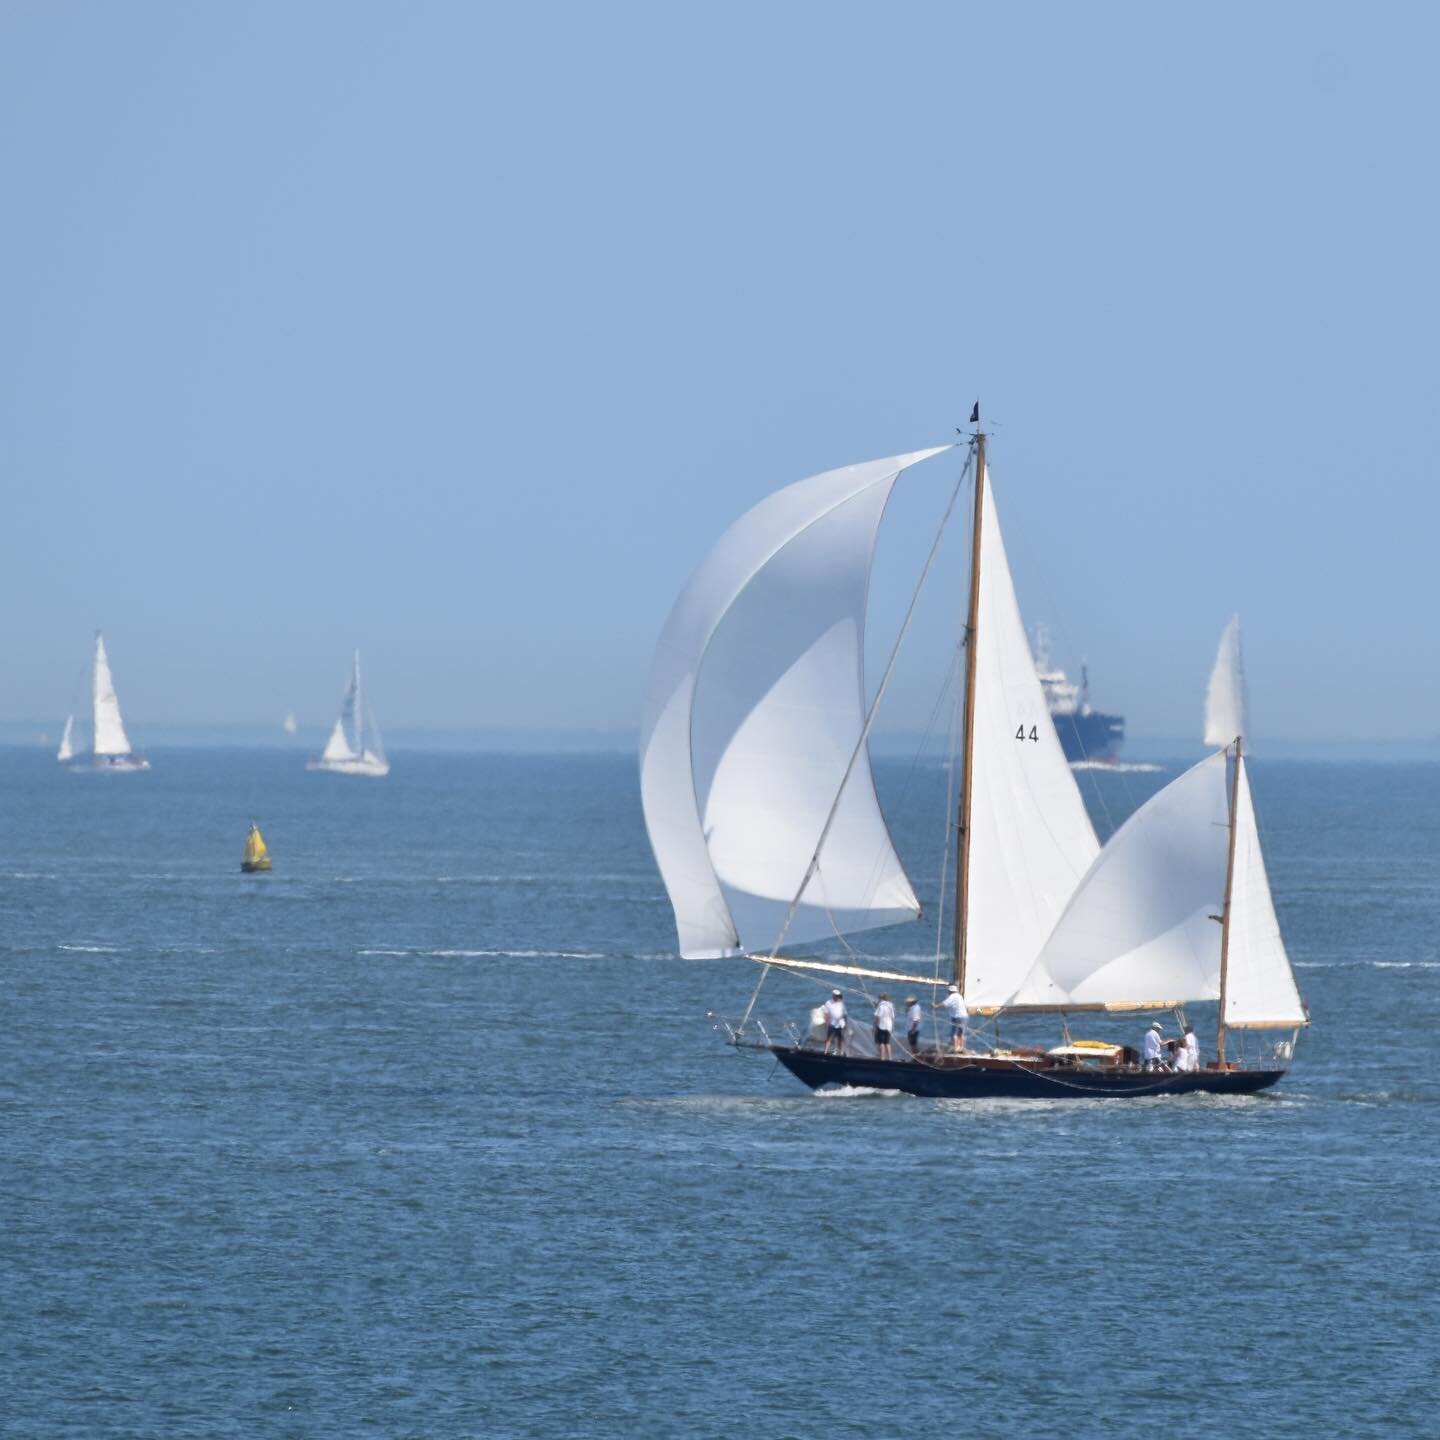 Beautiful conditions for British Classic Week here in the Solent
📷 By @feedrummond @britishclassicweek 
⠀⠀⠀⠀⠀⠀⠀⠀⠀

#seaview #coastalliving #sailinglife #seaviews #scenery #boats #nature #solent #cadlandestate #countrylife #boatlife #bythesea #vitami